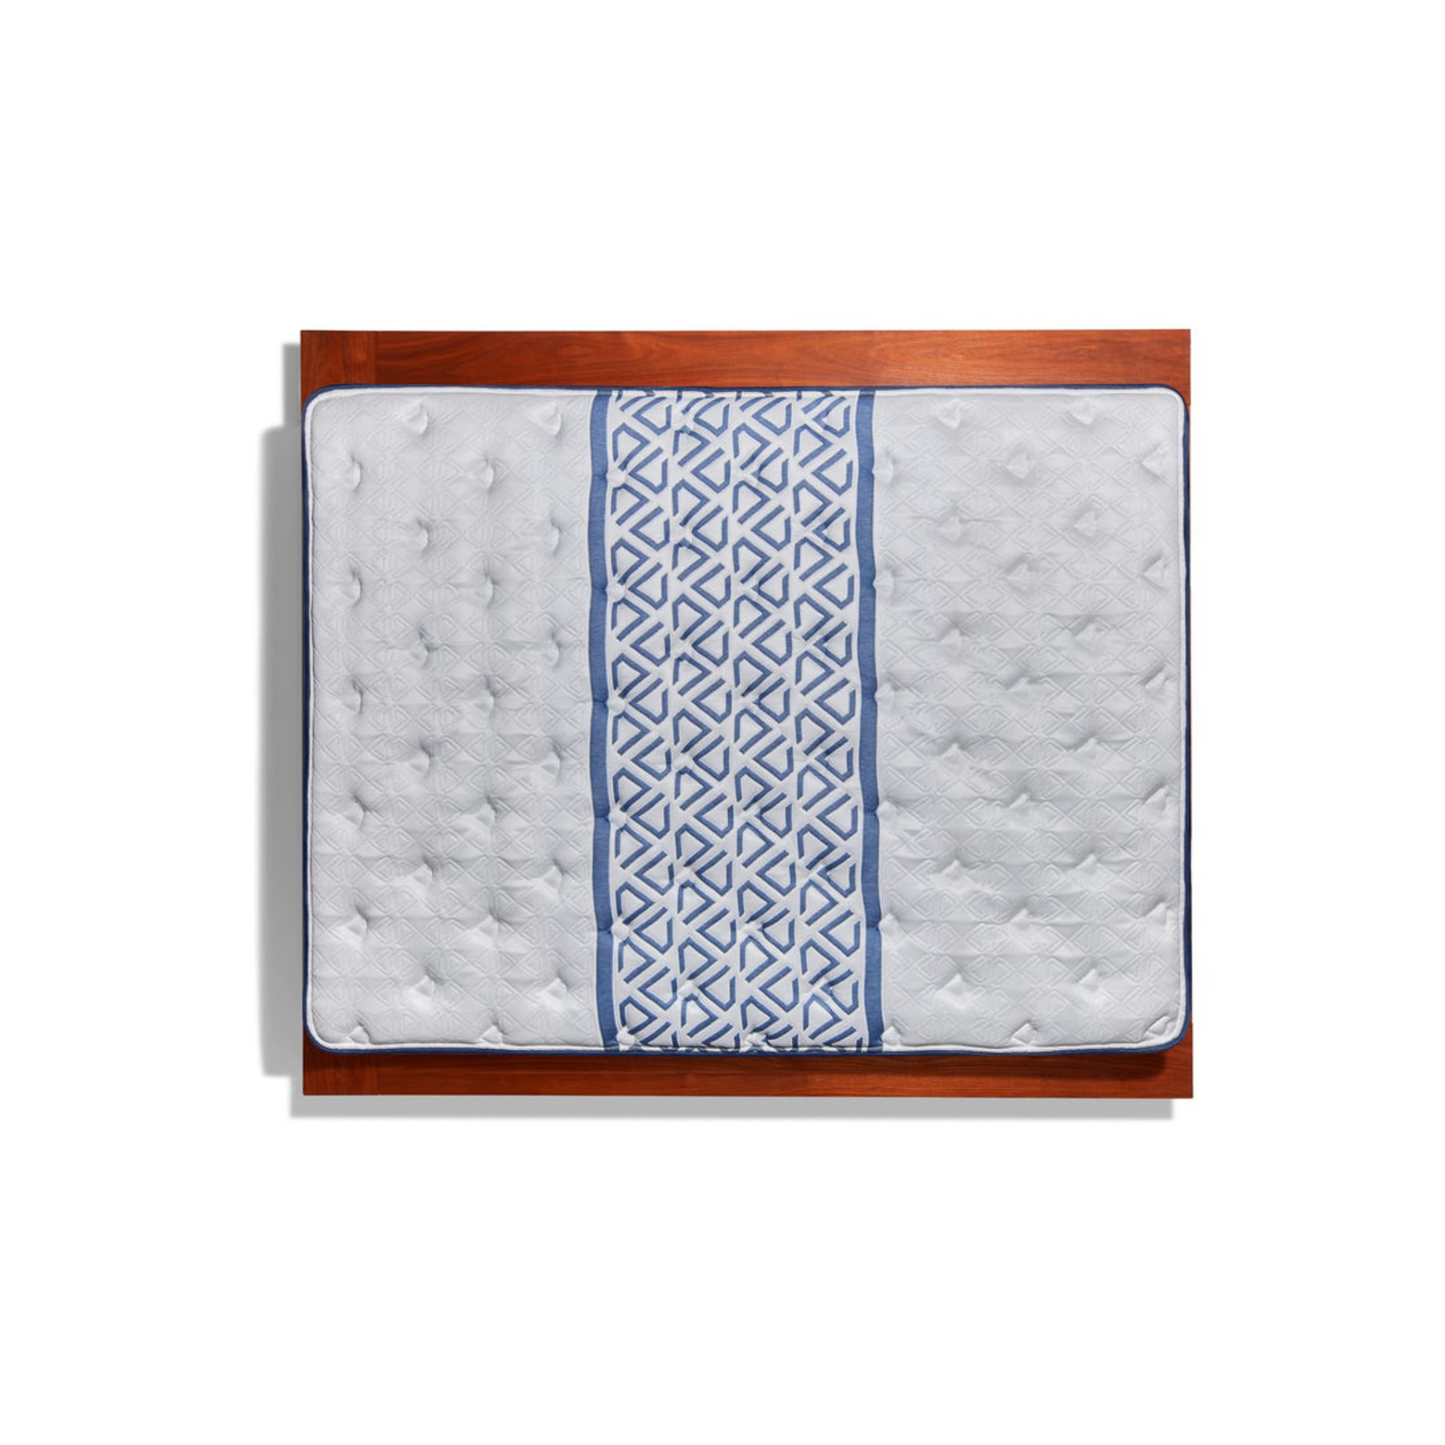 Intention 13.5" Hybrid Mattress With Patented Diamond Sparkle Hyper-Conductive Memory Foam, Top View